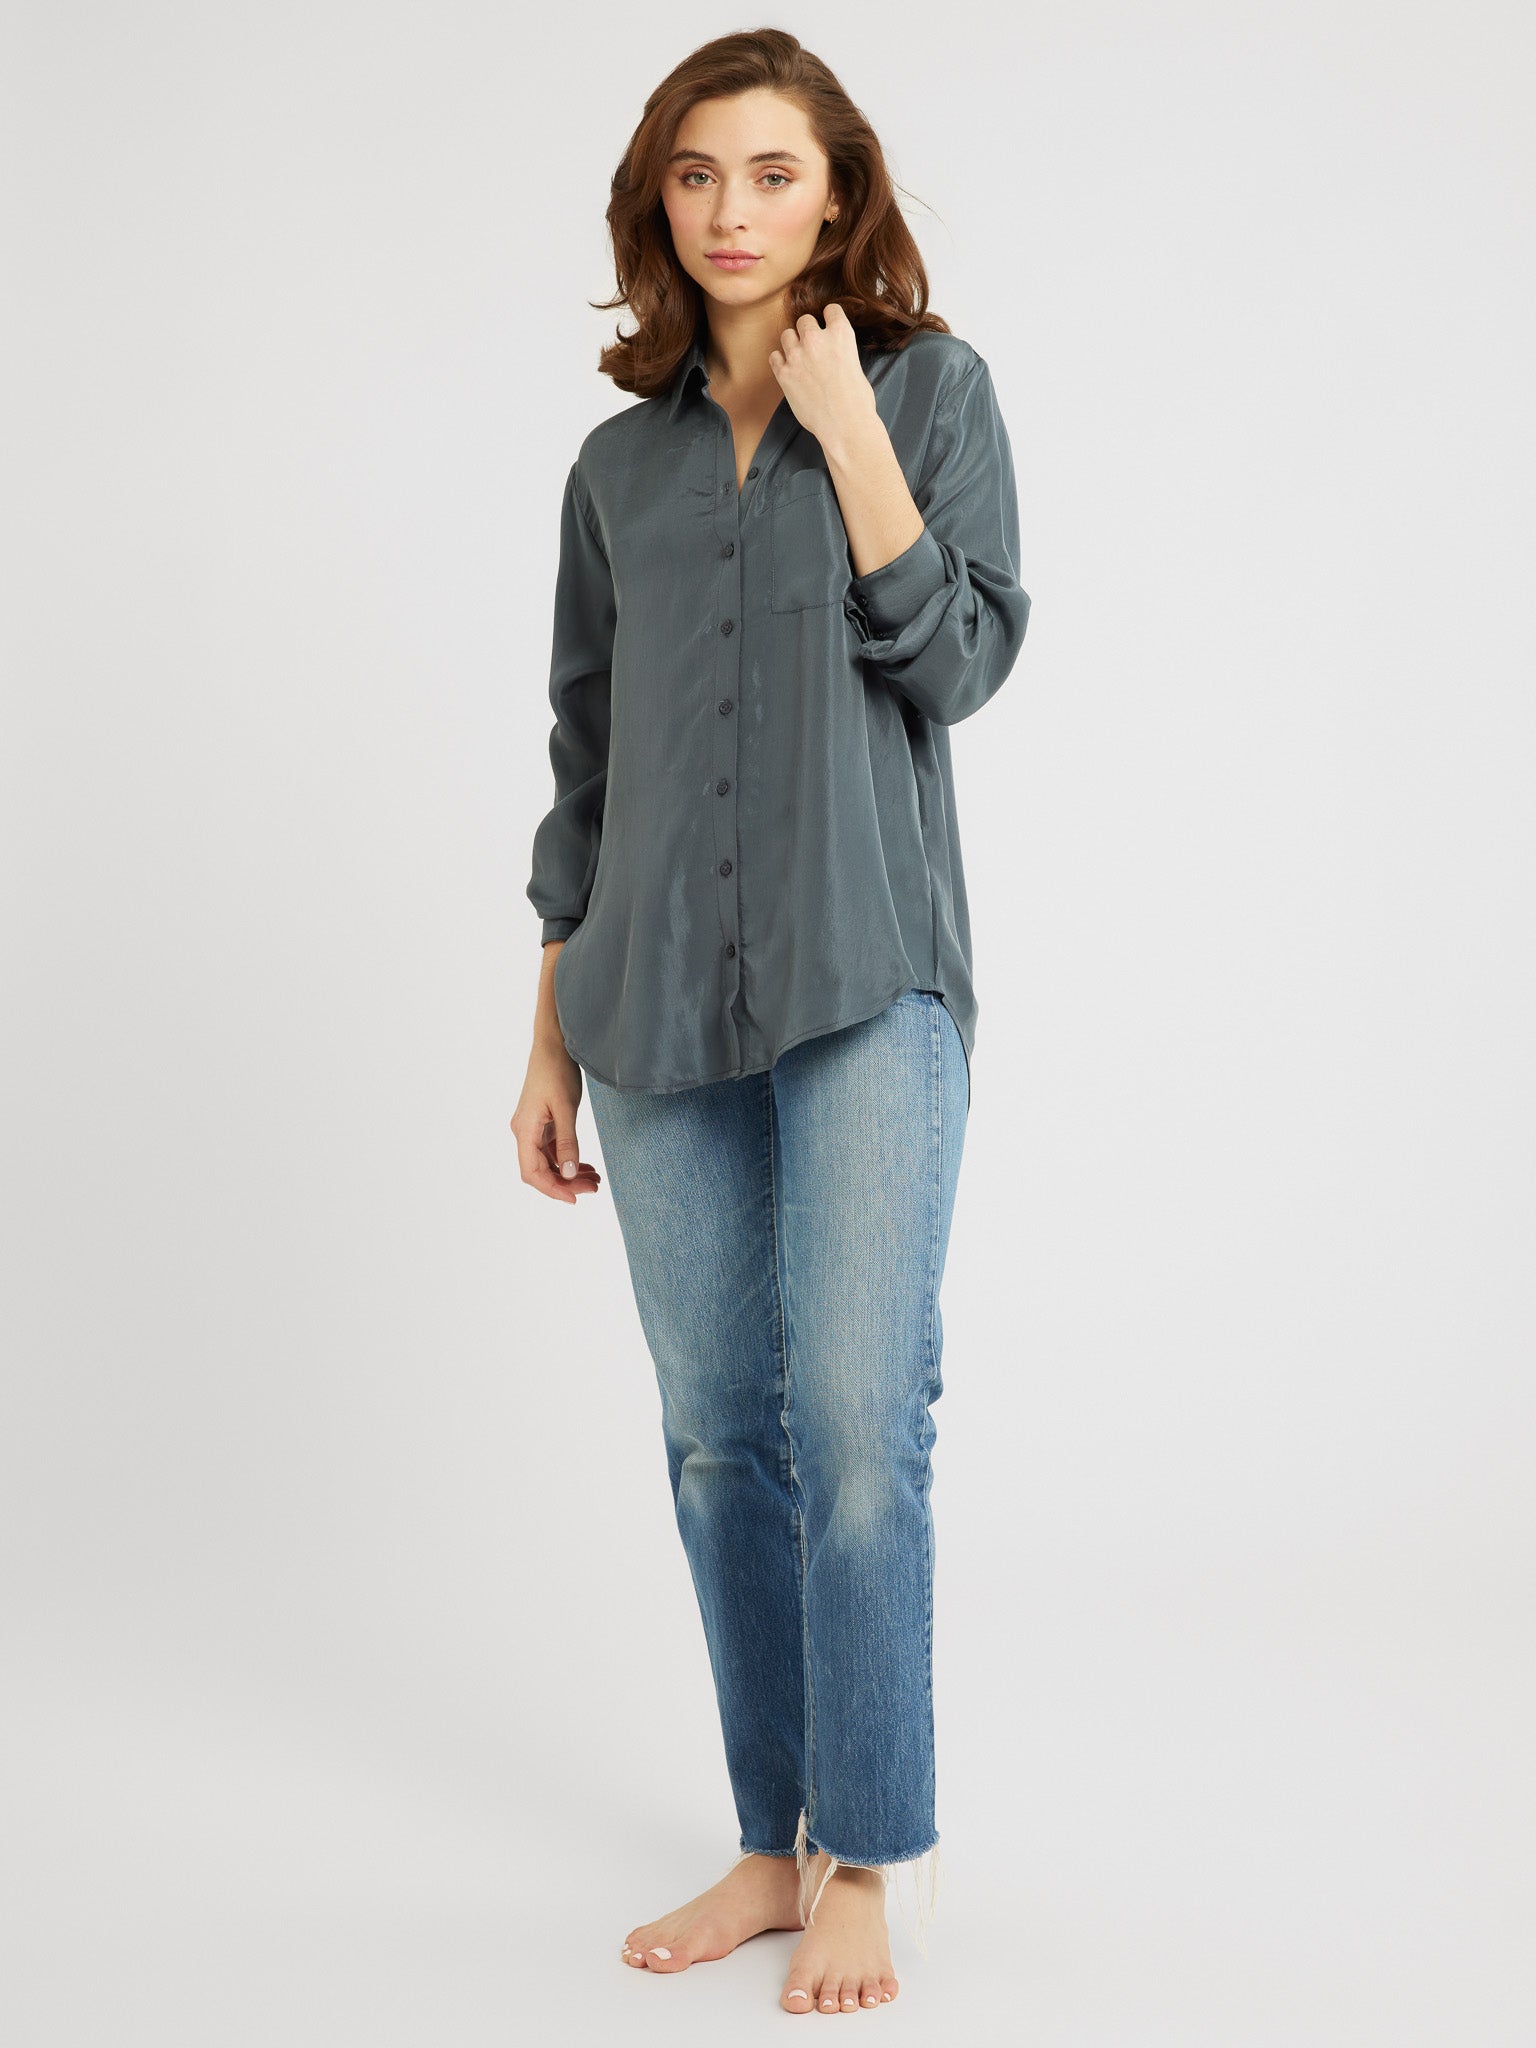 MILLE Clothing Sofia Top in Navy Washed Silk